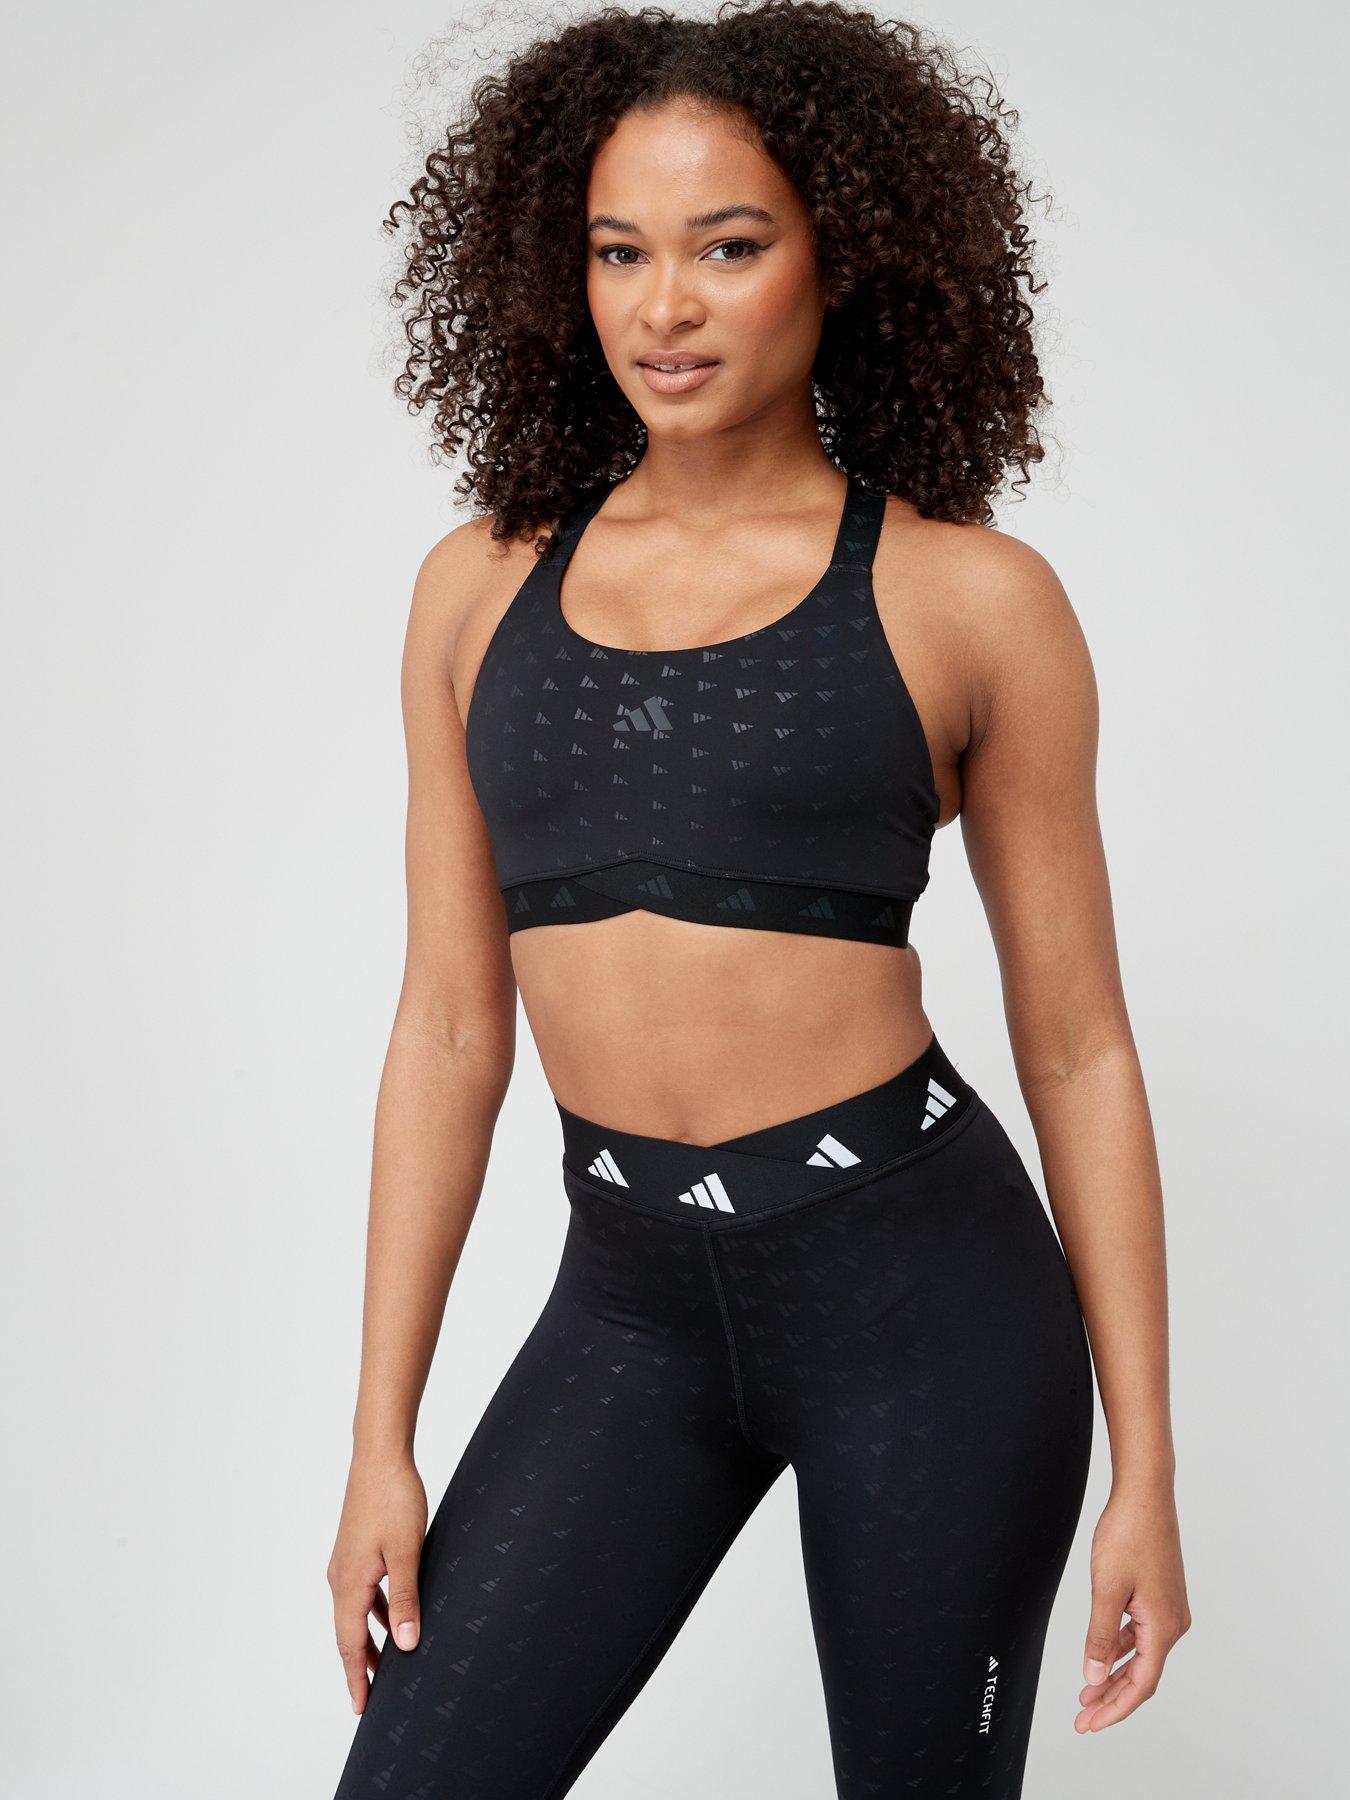 adidas Performance TLRD IMPACT - High support sports bra - silver